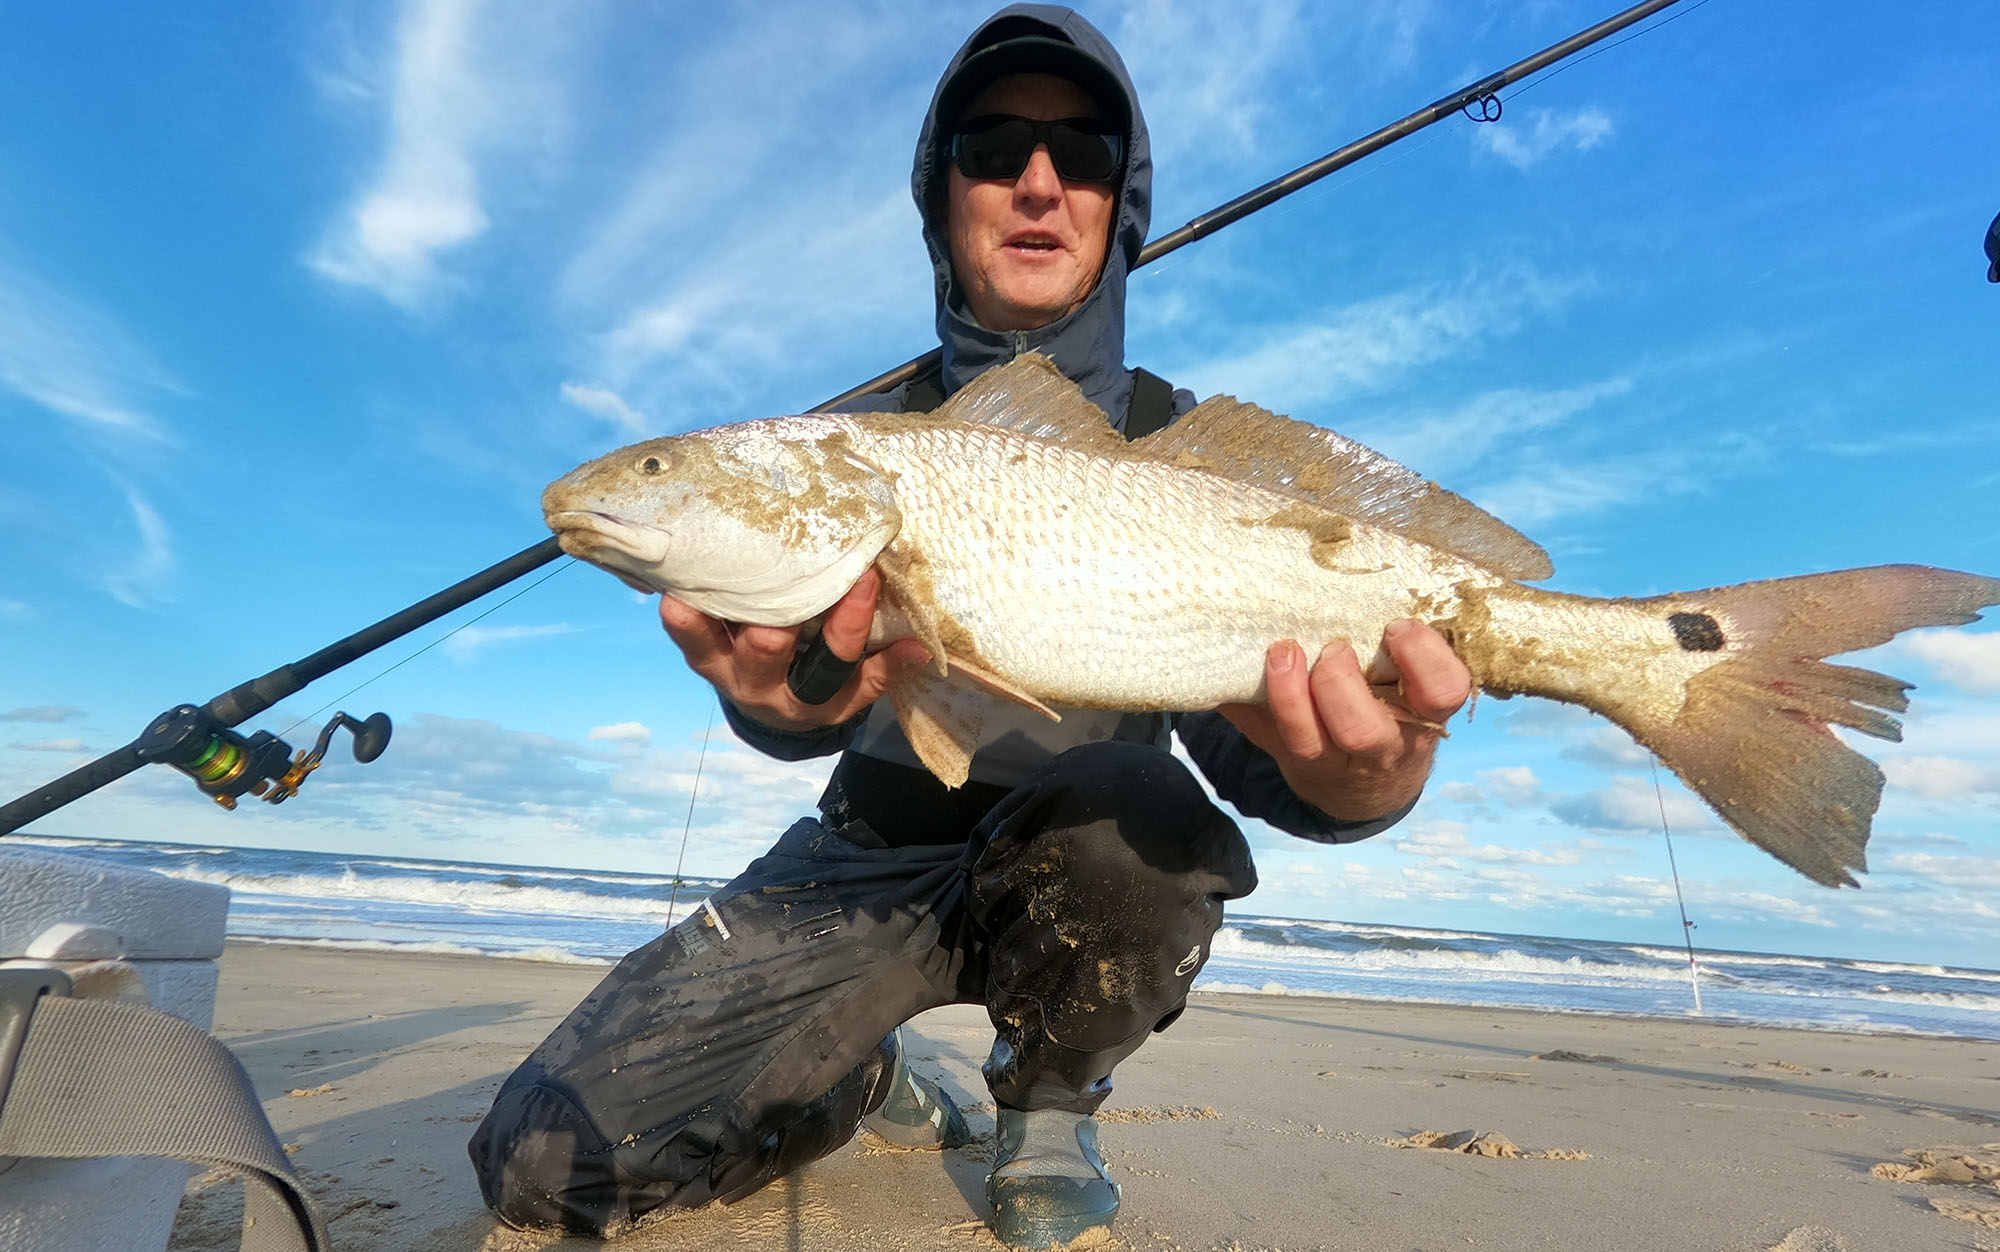 Angler holds fish on a beach.